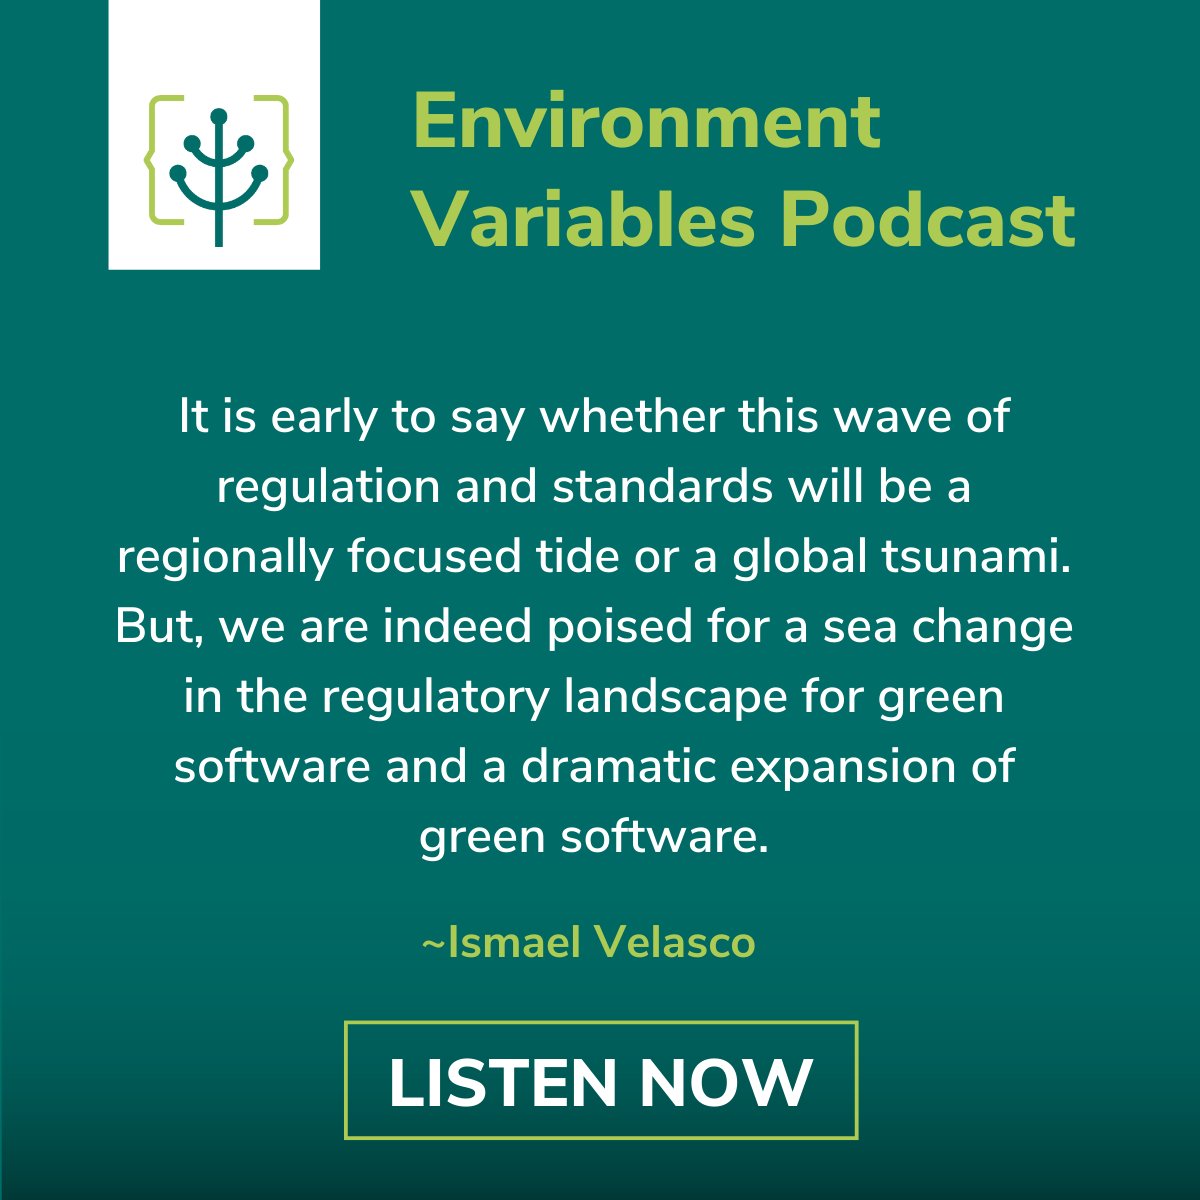 🤔 What do you know about #greensoftware regulation? Our latest episode of Environment Variables delves into this topic, and @DevOnAJourney covers the wave of upcoming green software legislation and standards gaining momentum. Listen now ➡️ grnsft.org/podcast/ep16